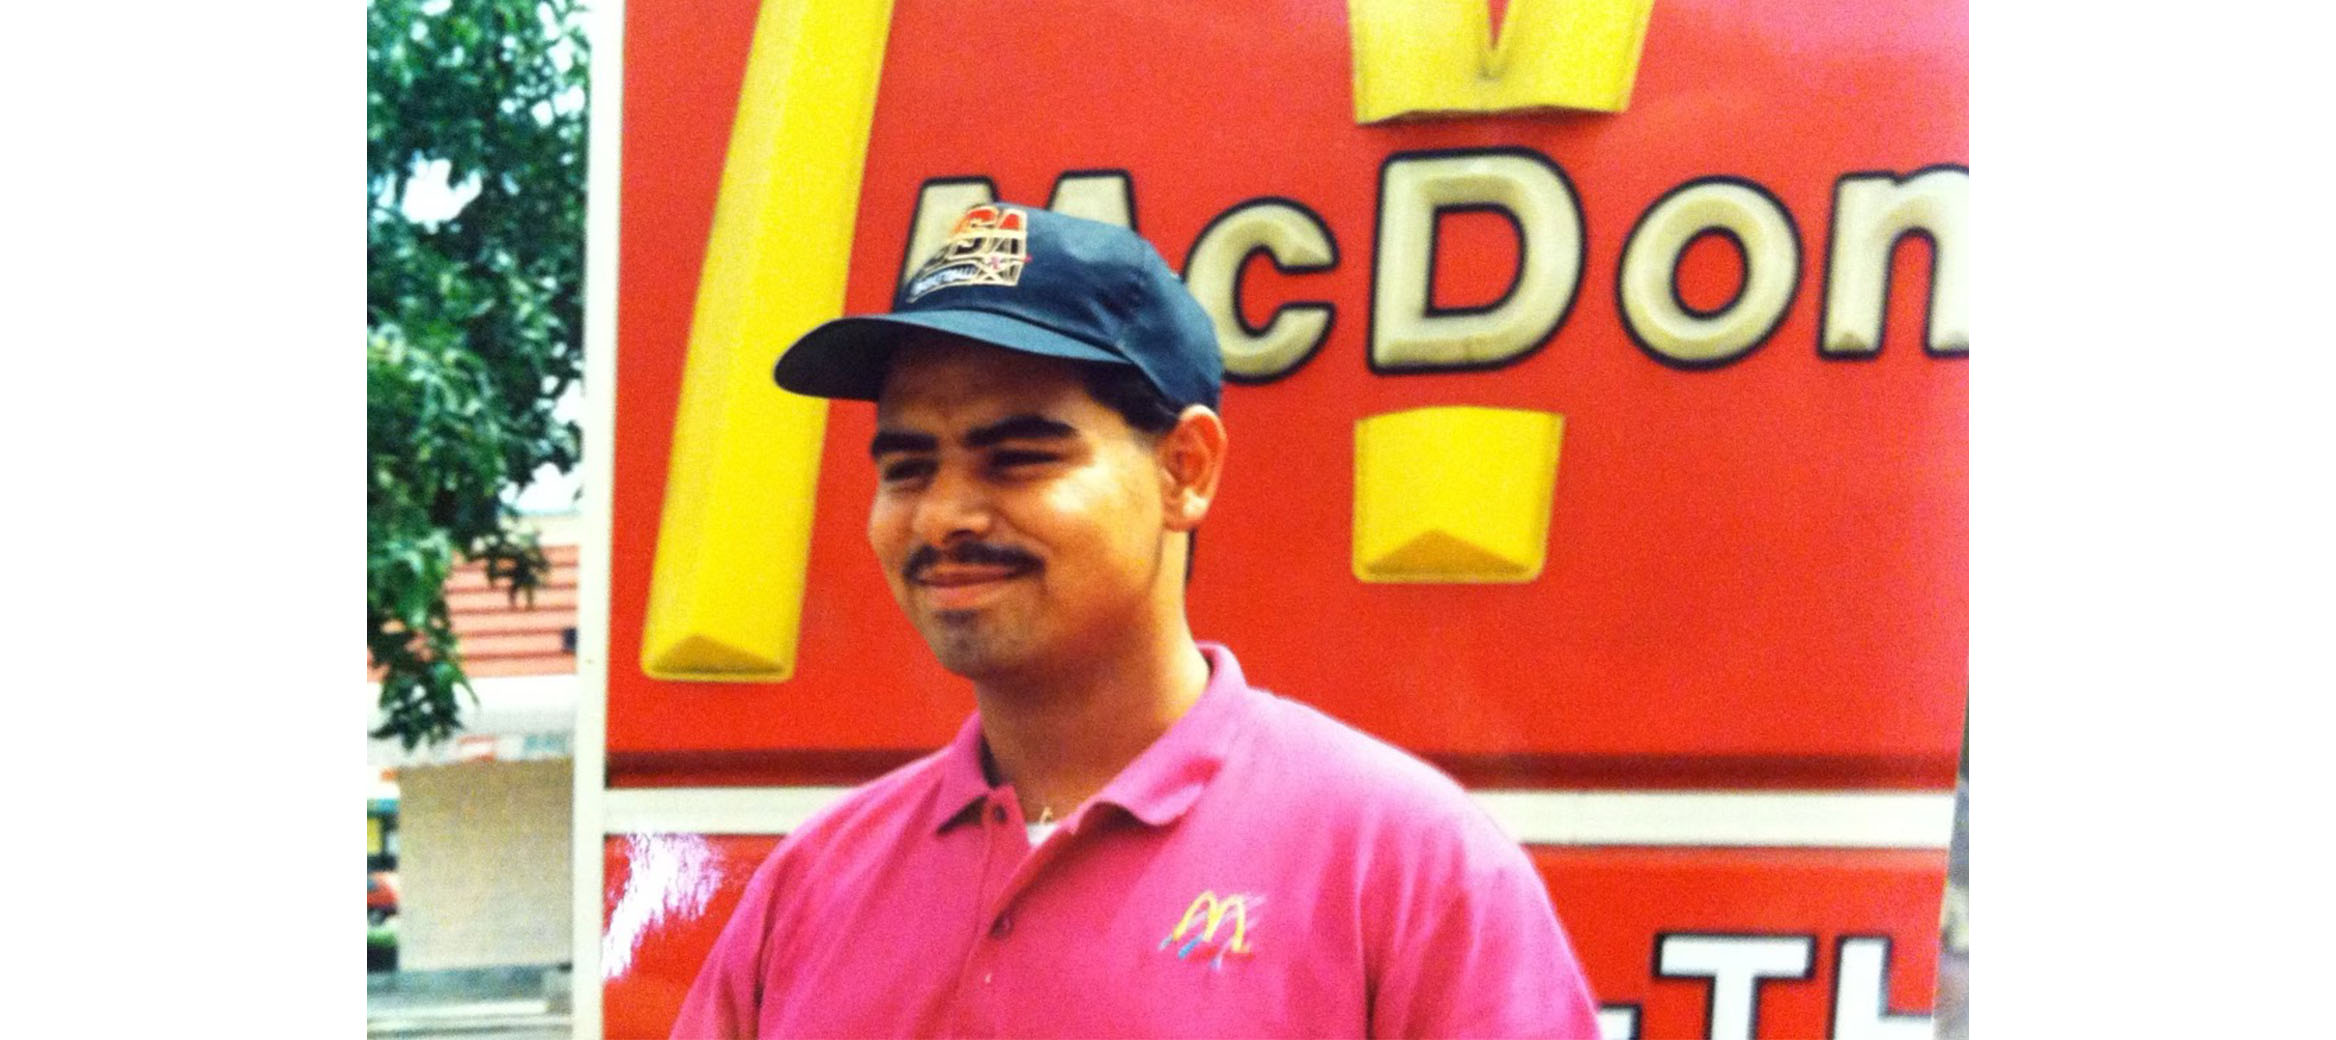 Juan Marquez in his younger years as restaurant crew